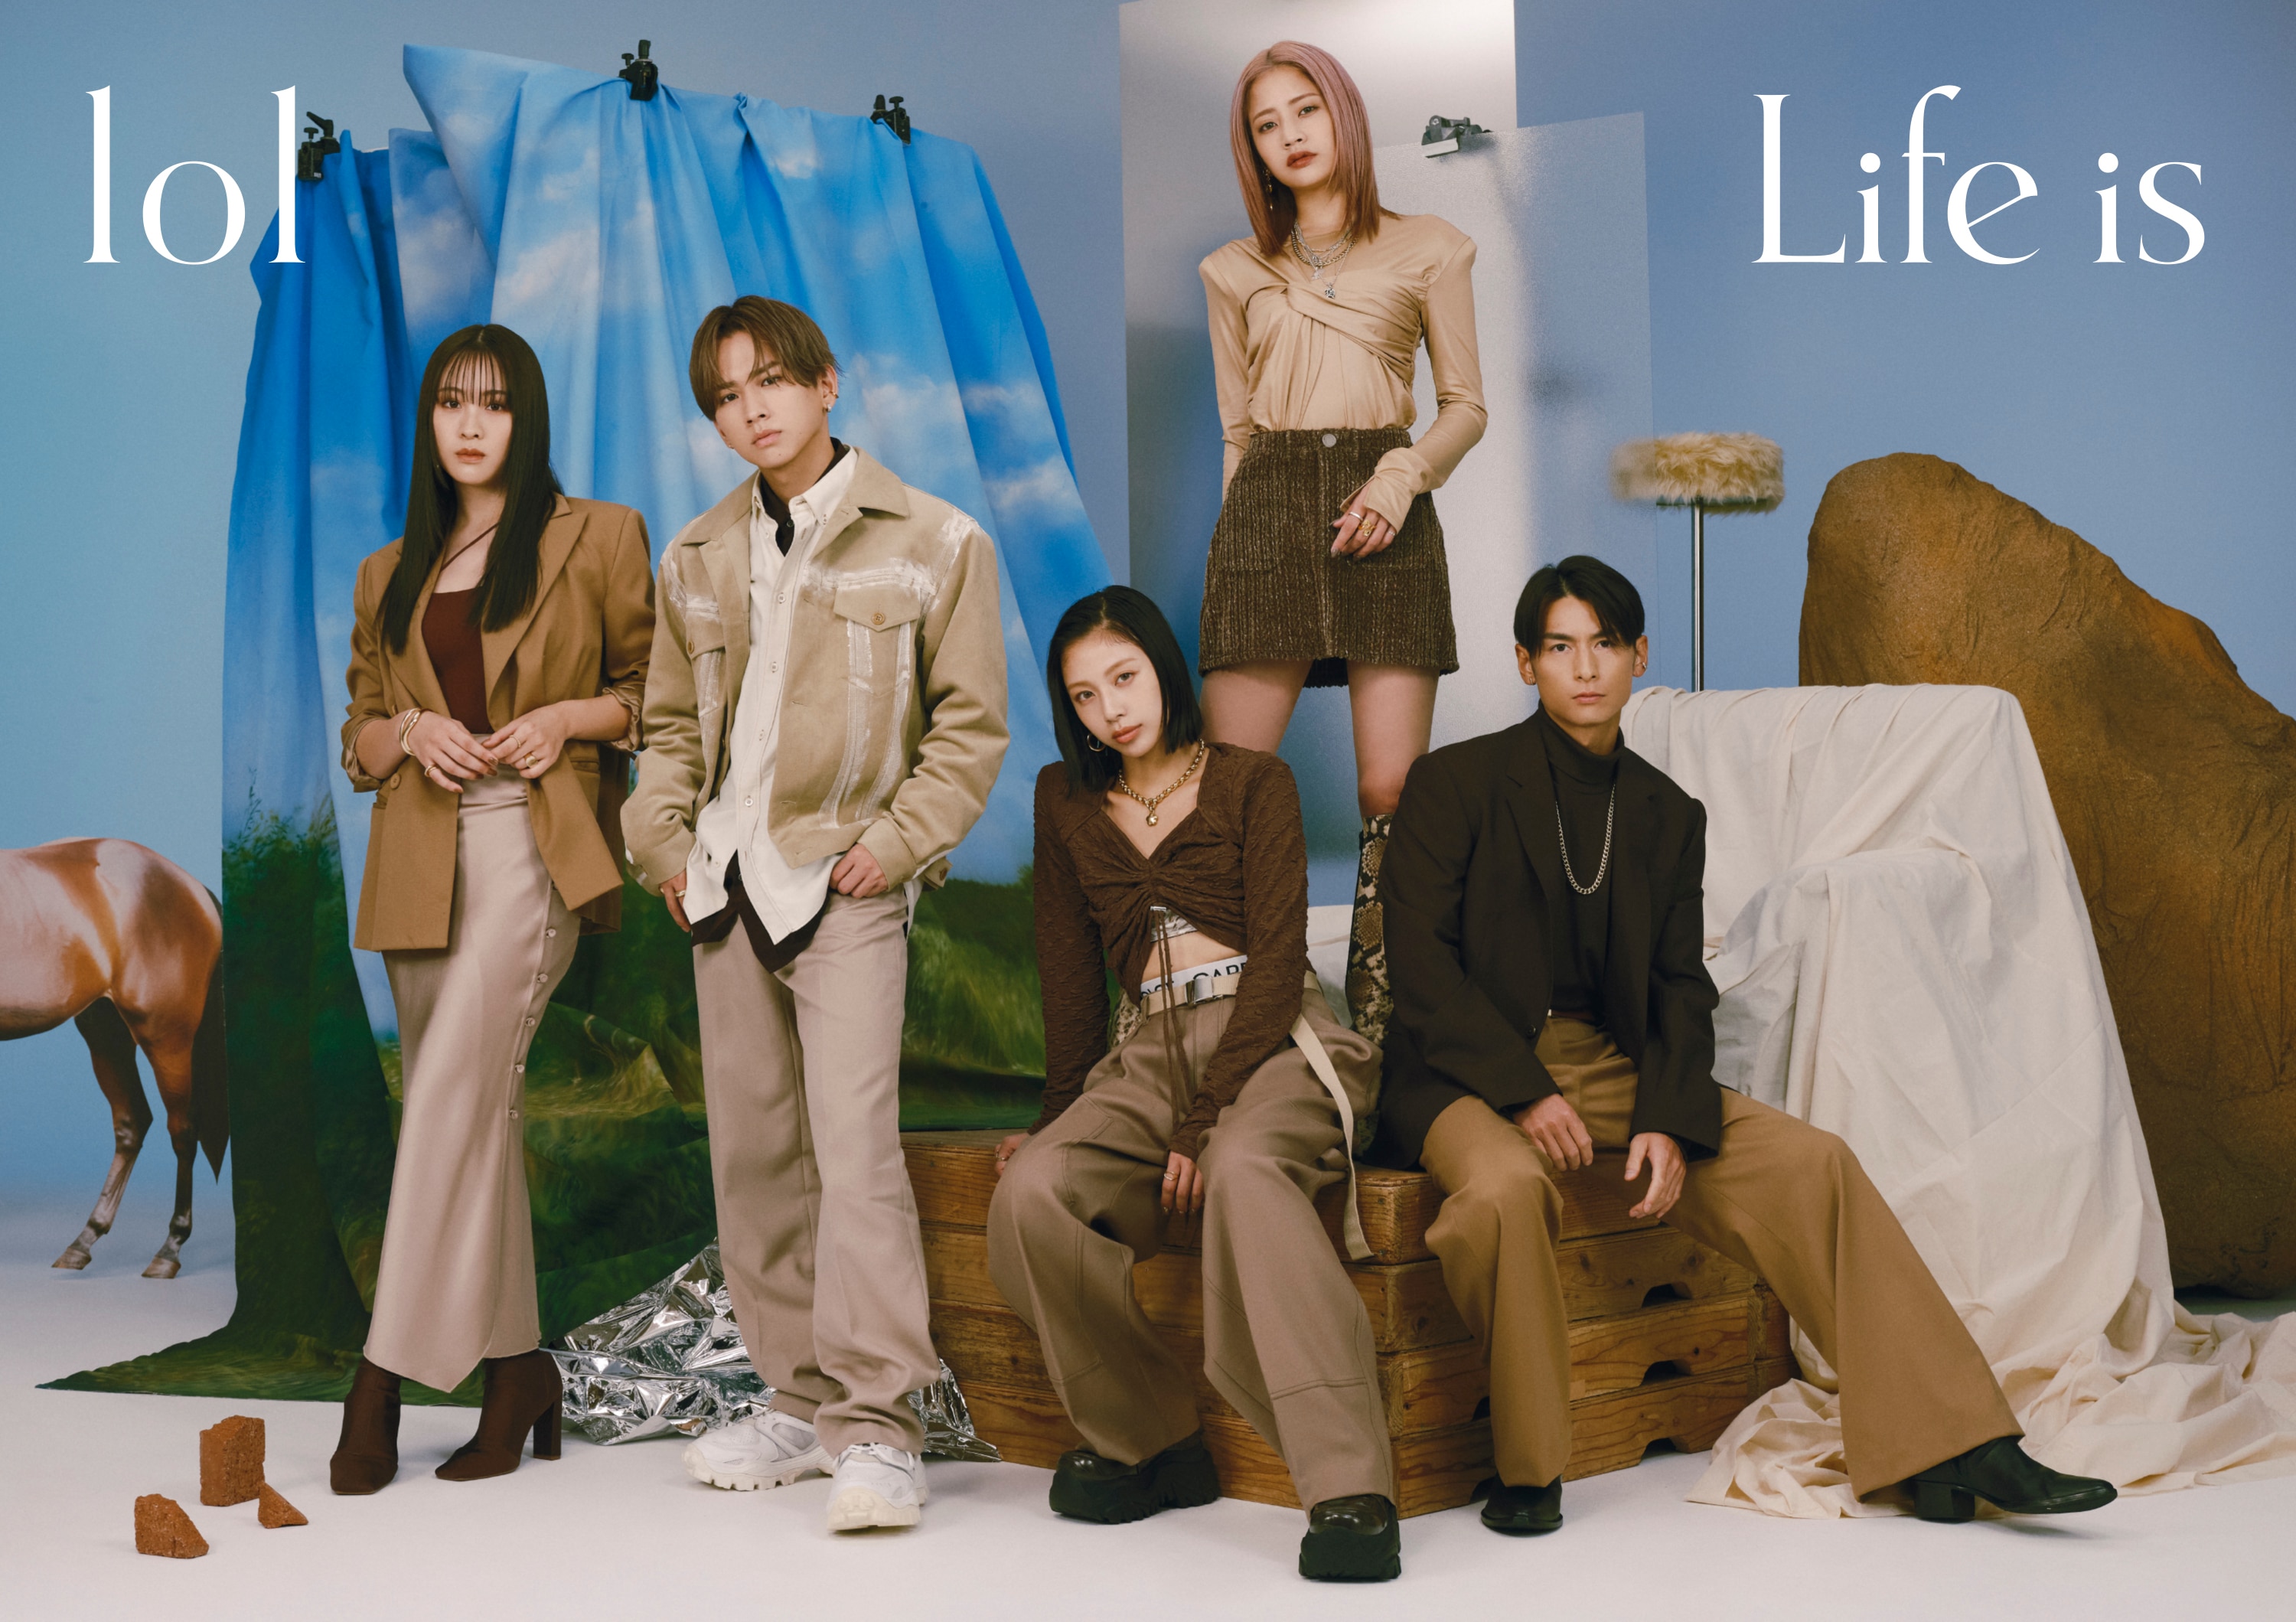 5th AL(1月17日 Release) 「Life is」 